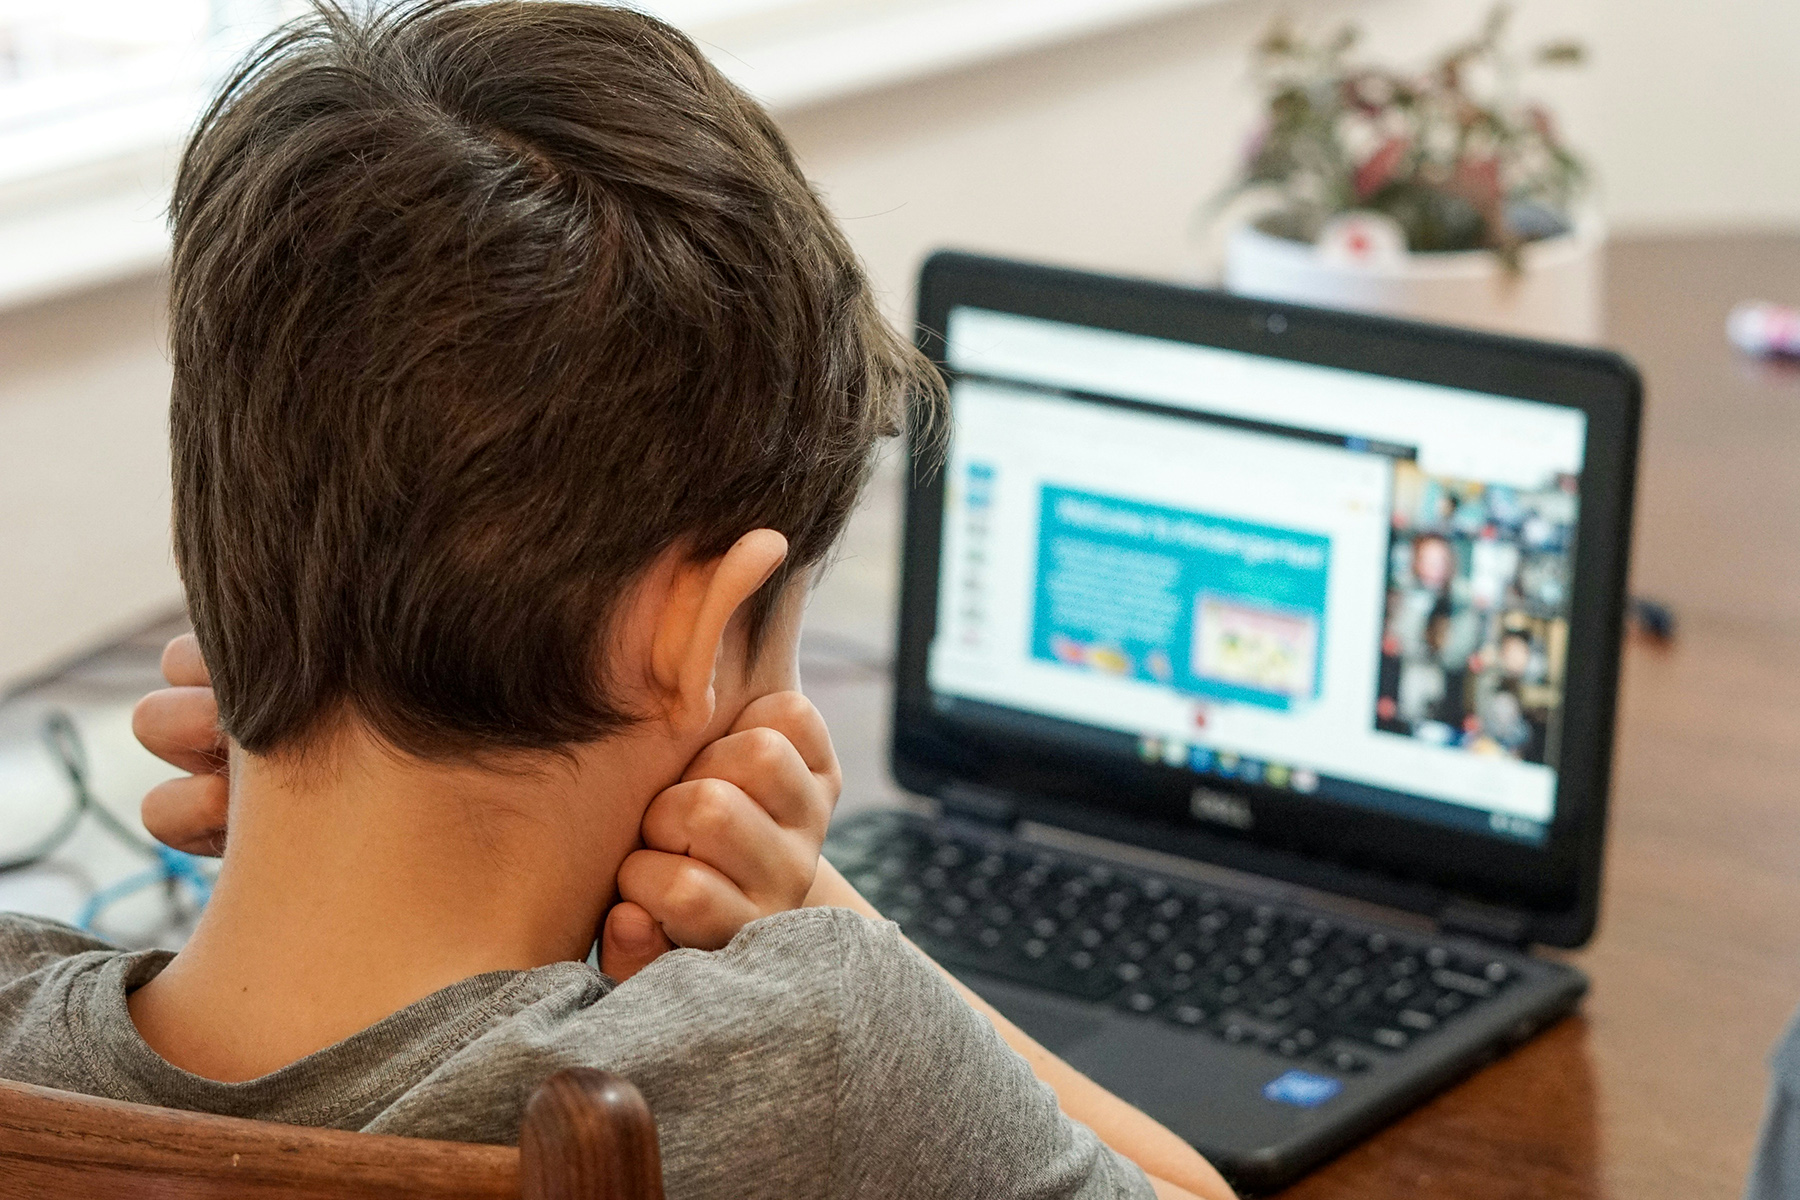 Kindergarten boy looking at laptop computer during first day of virtual learning online school